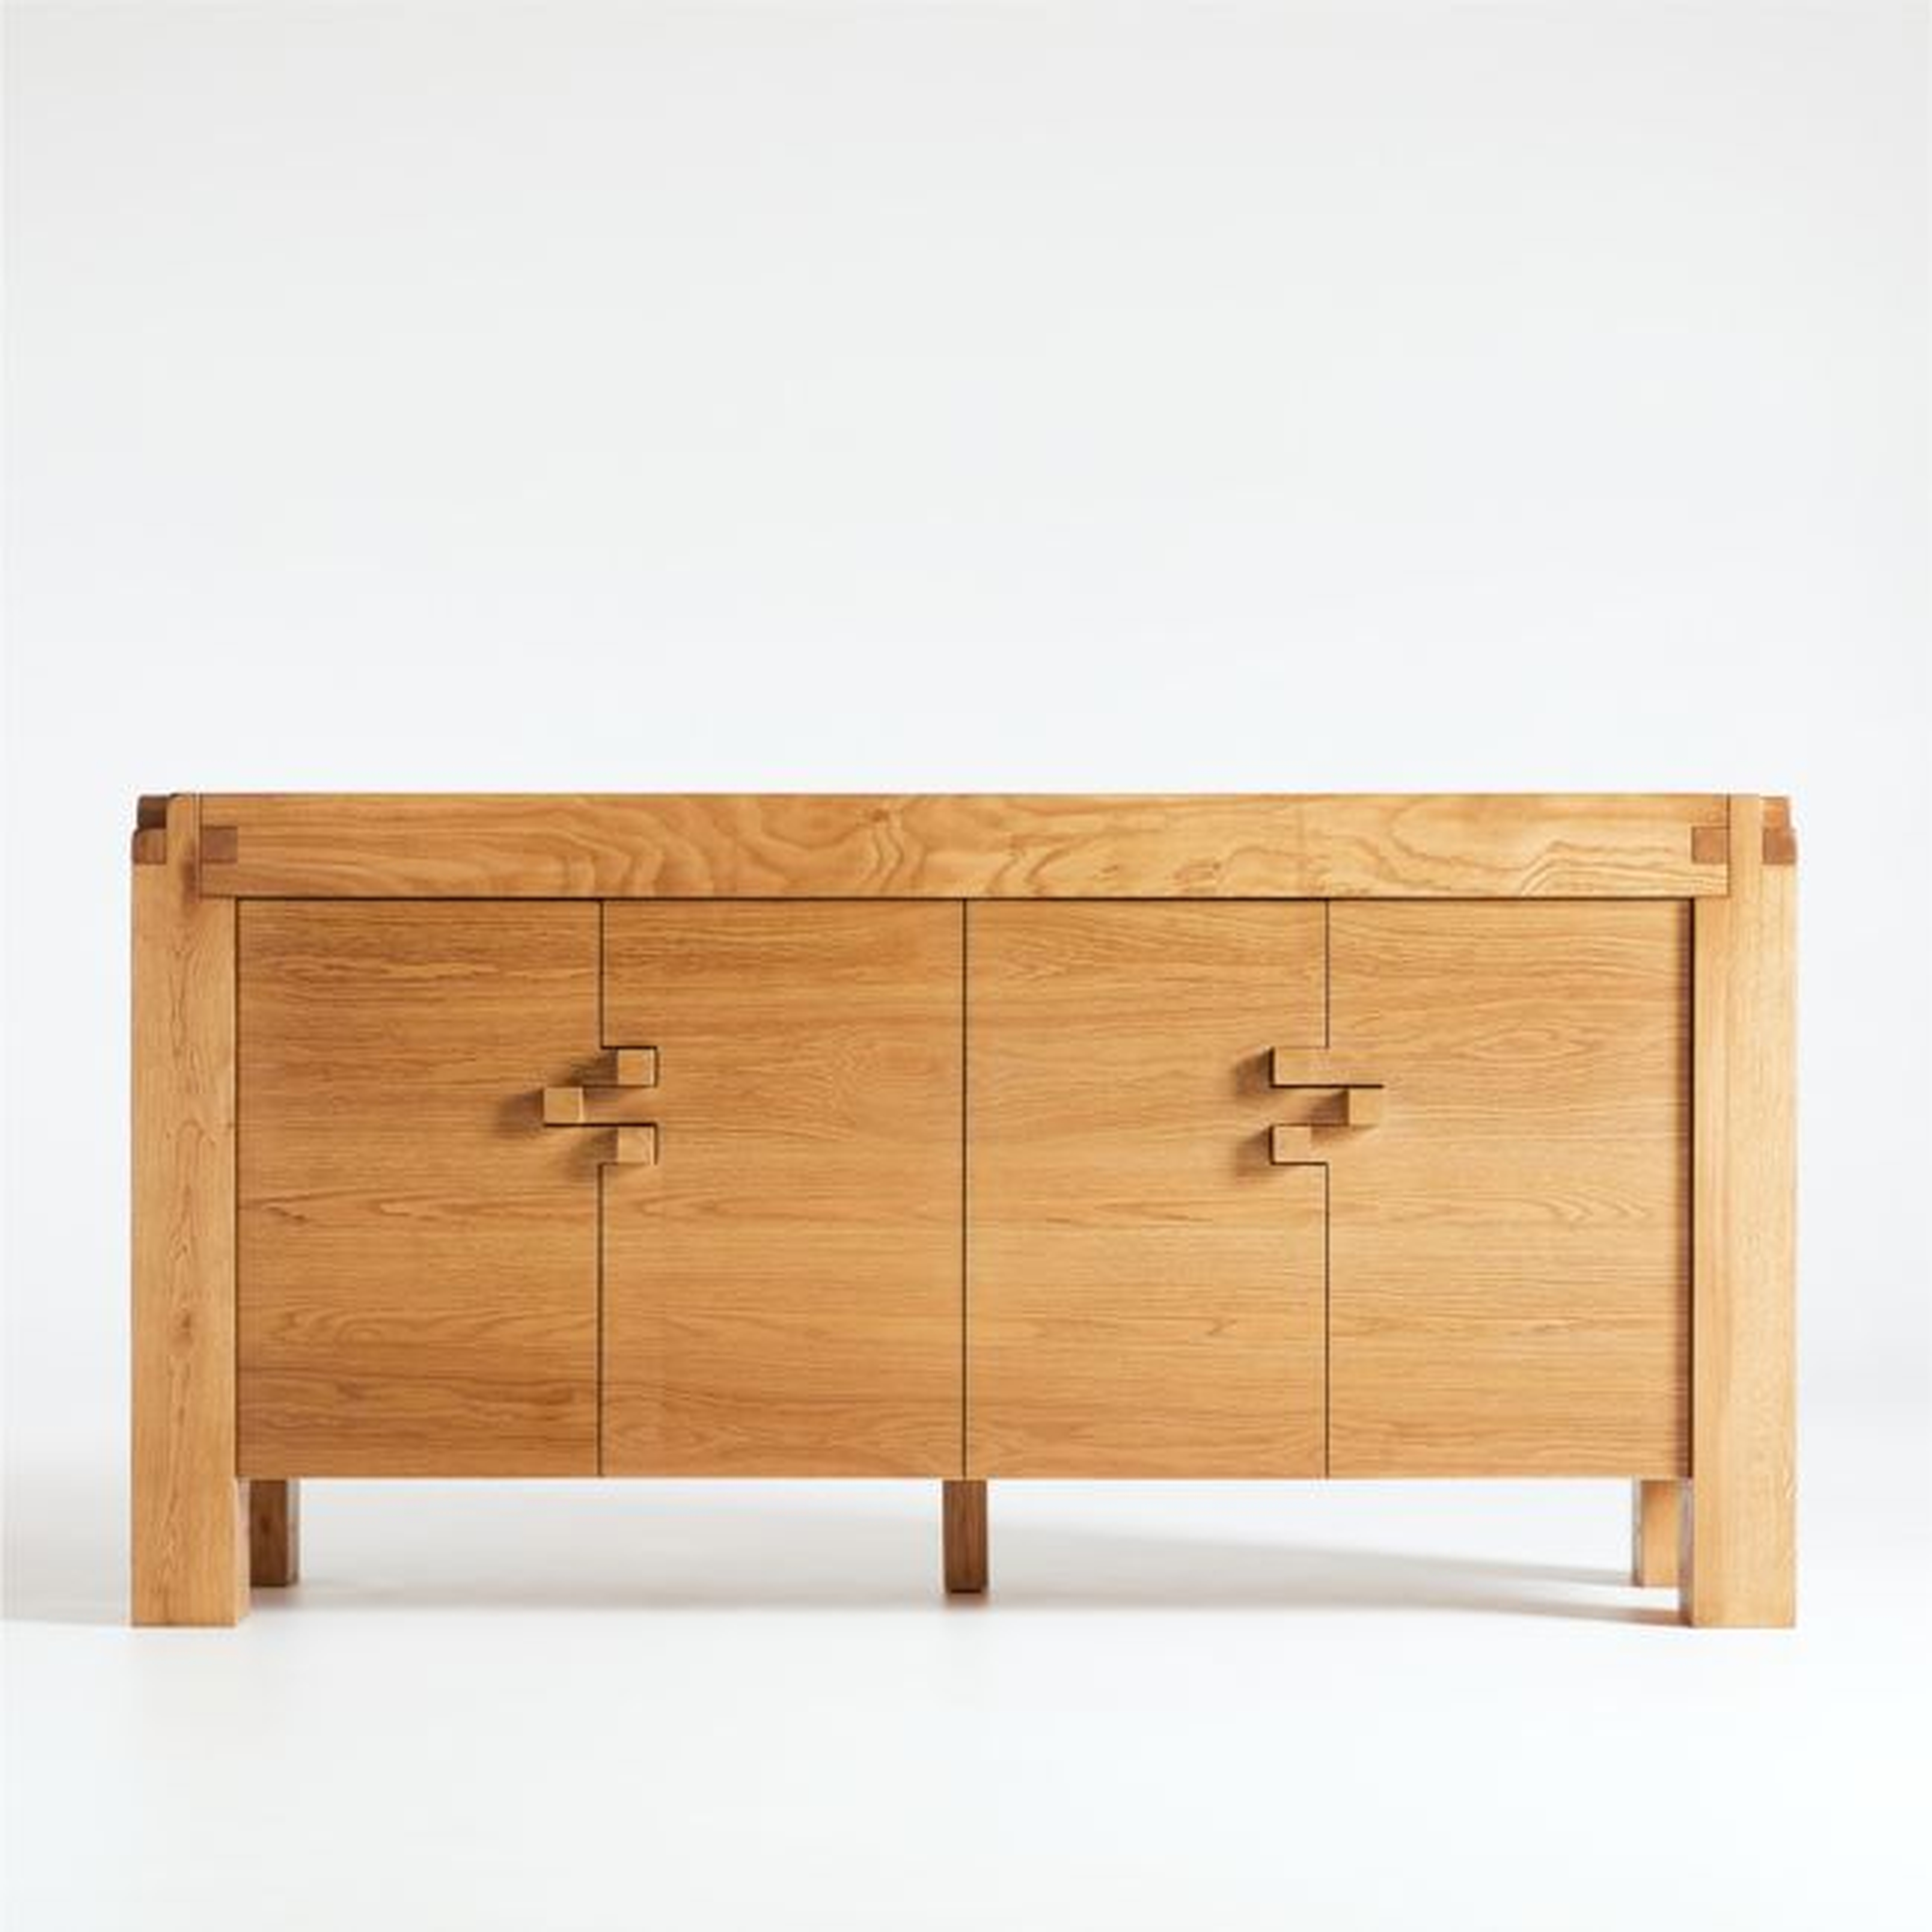 Knot Rustic Sideboard - Crate and Barrel